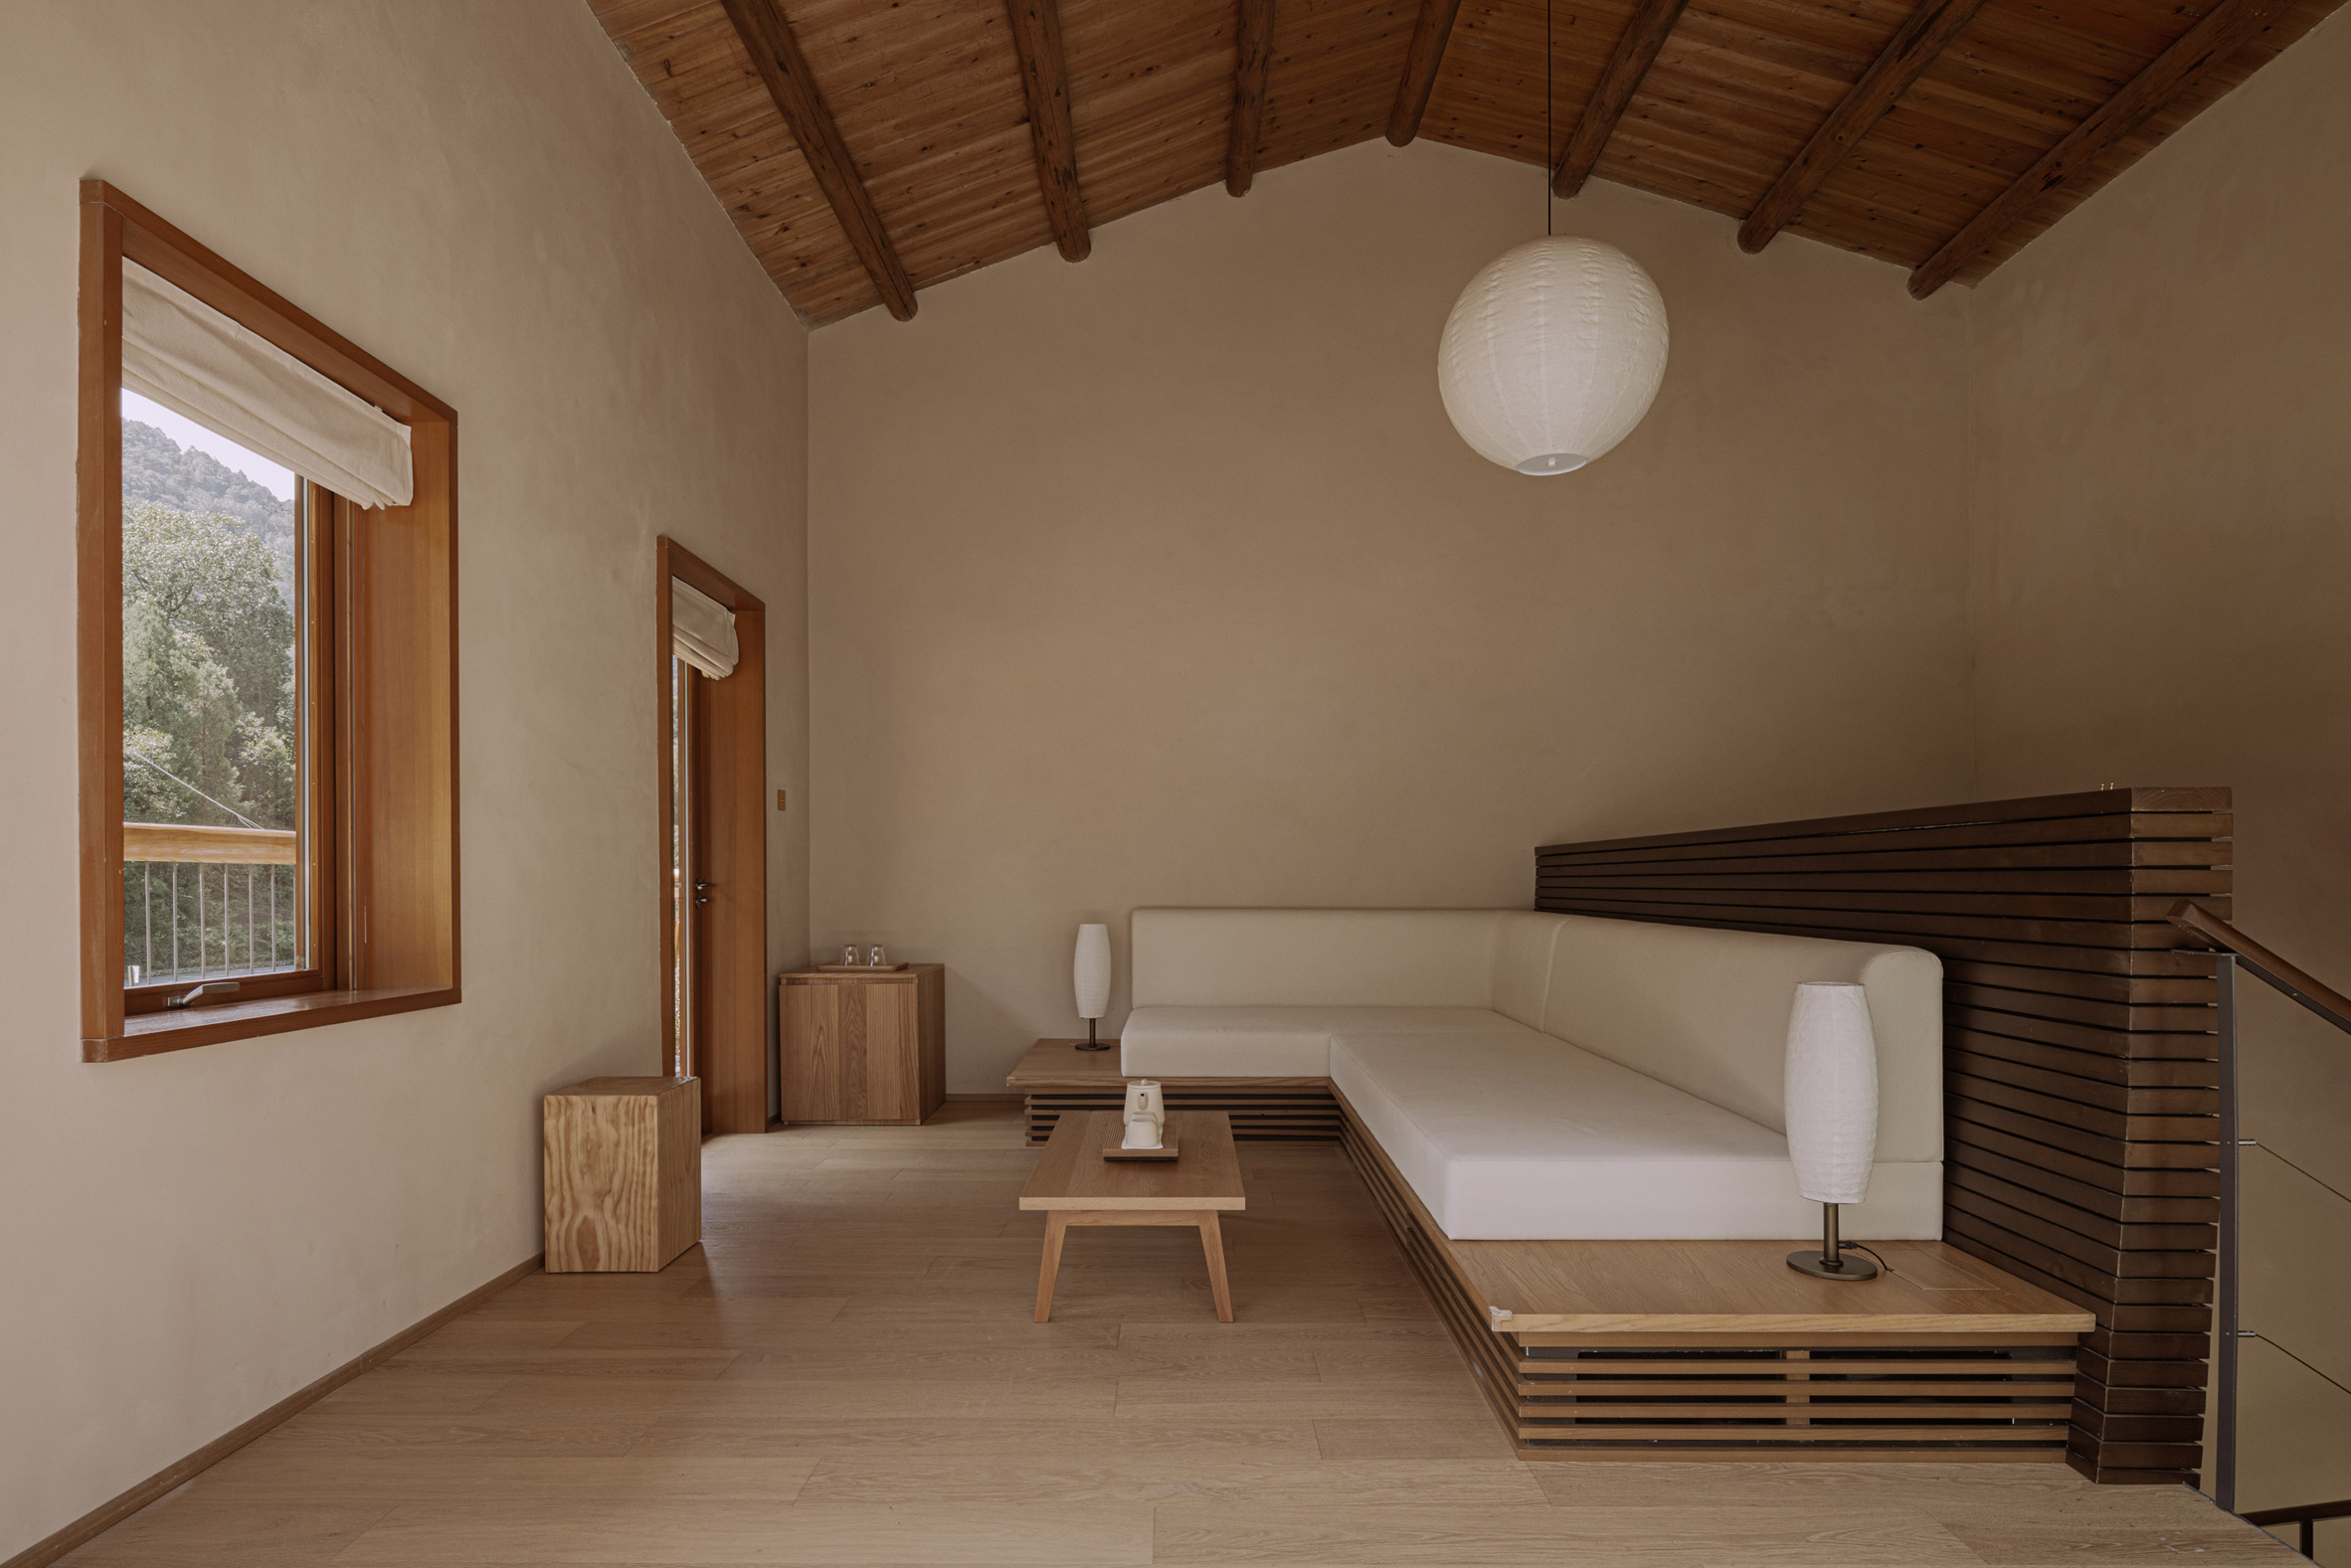 Interior view of Ningshan Luzhai Cottages in Ankang City, China, by Kooo Architects